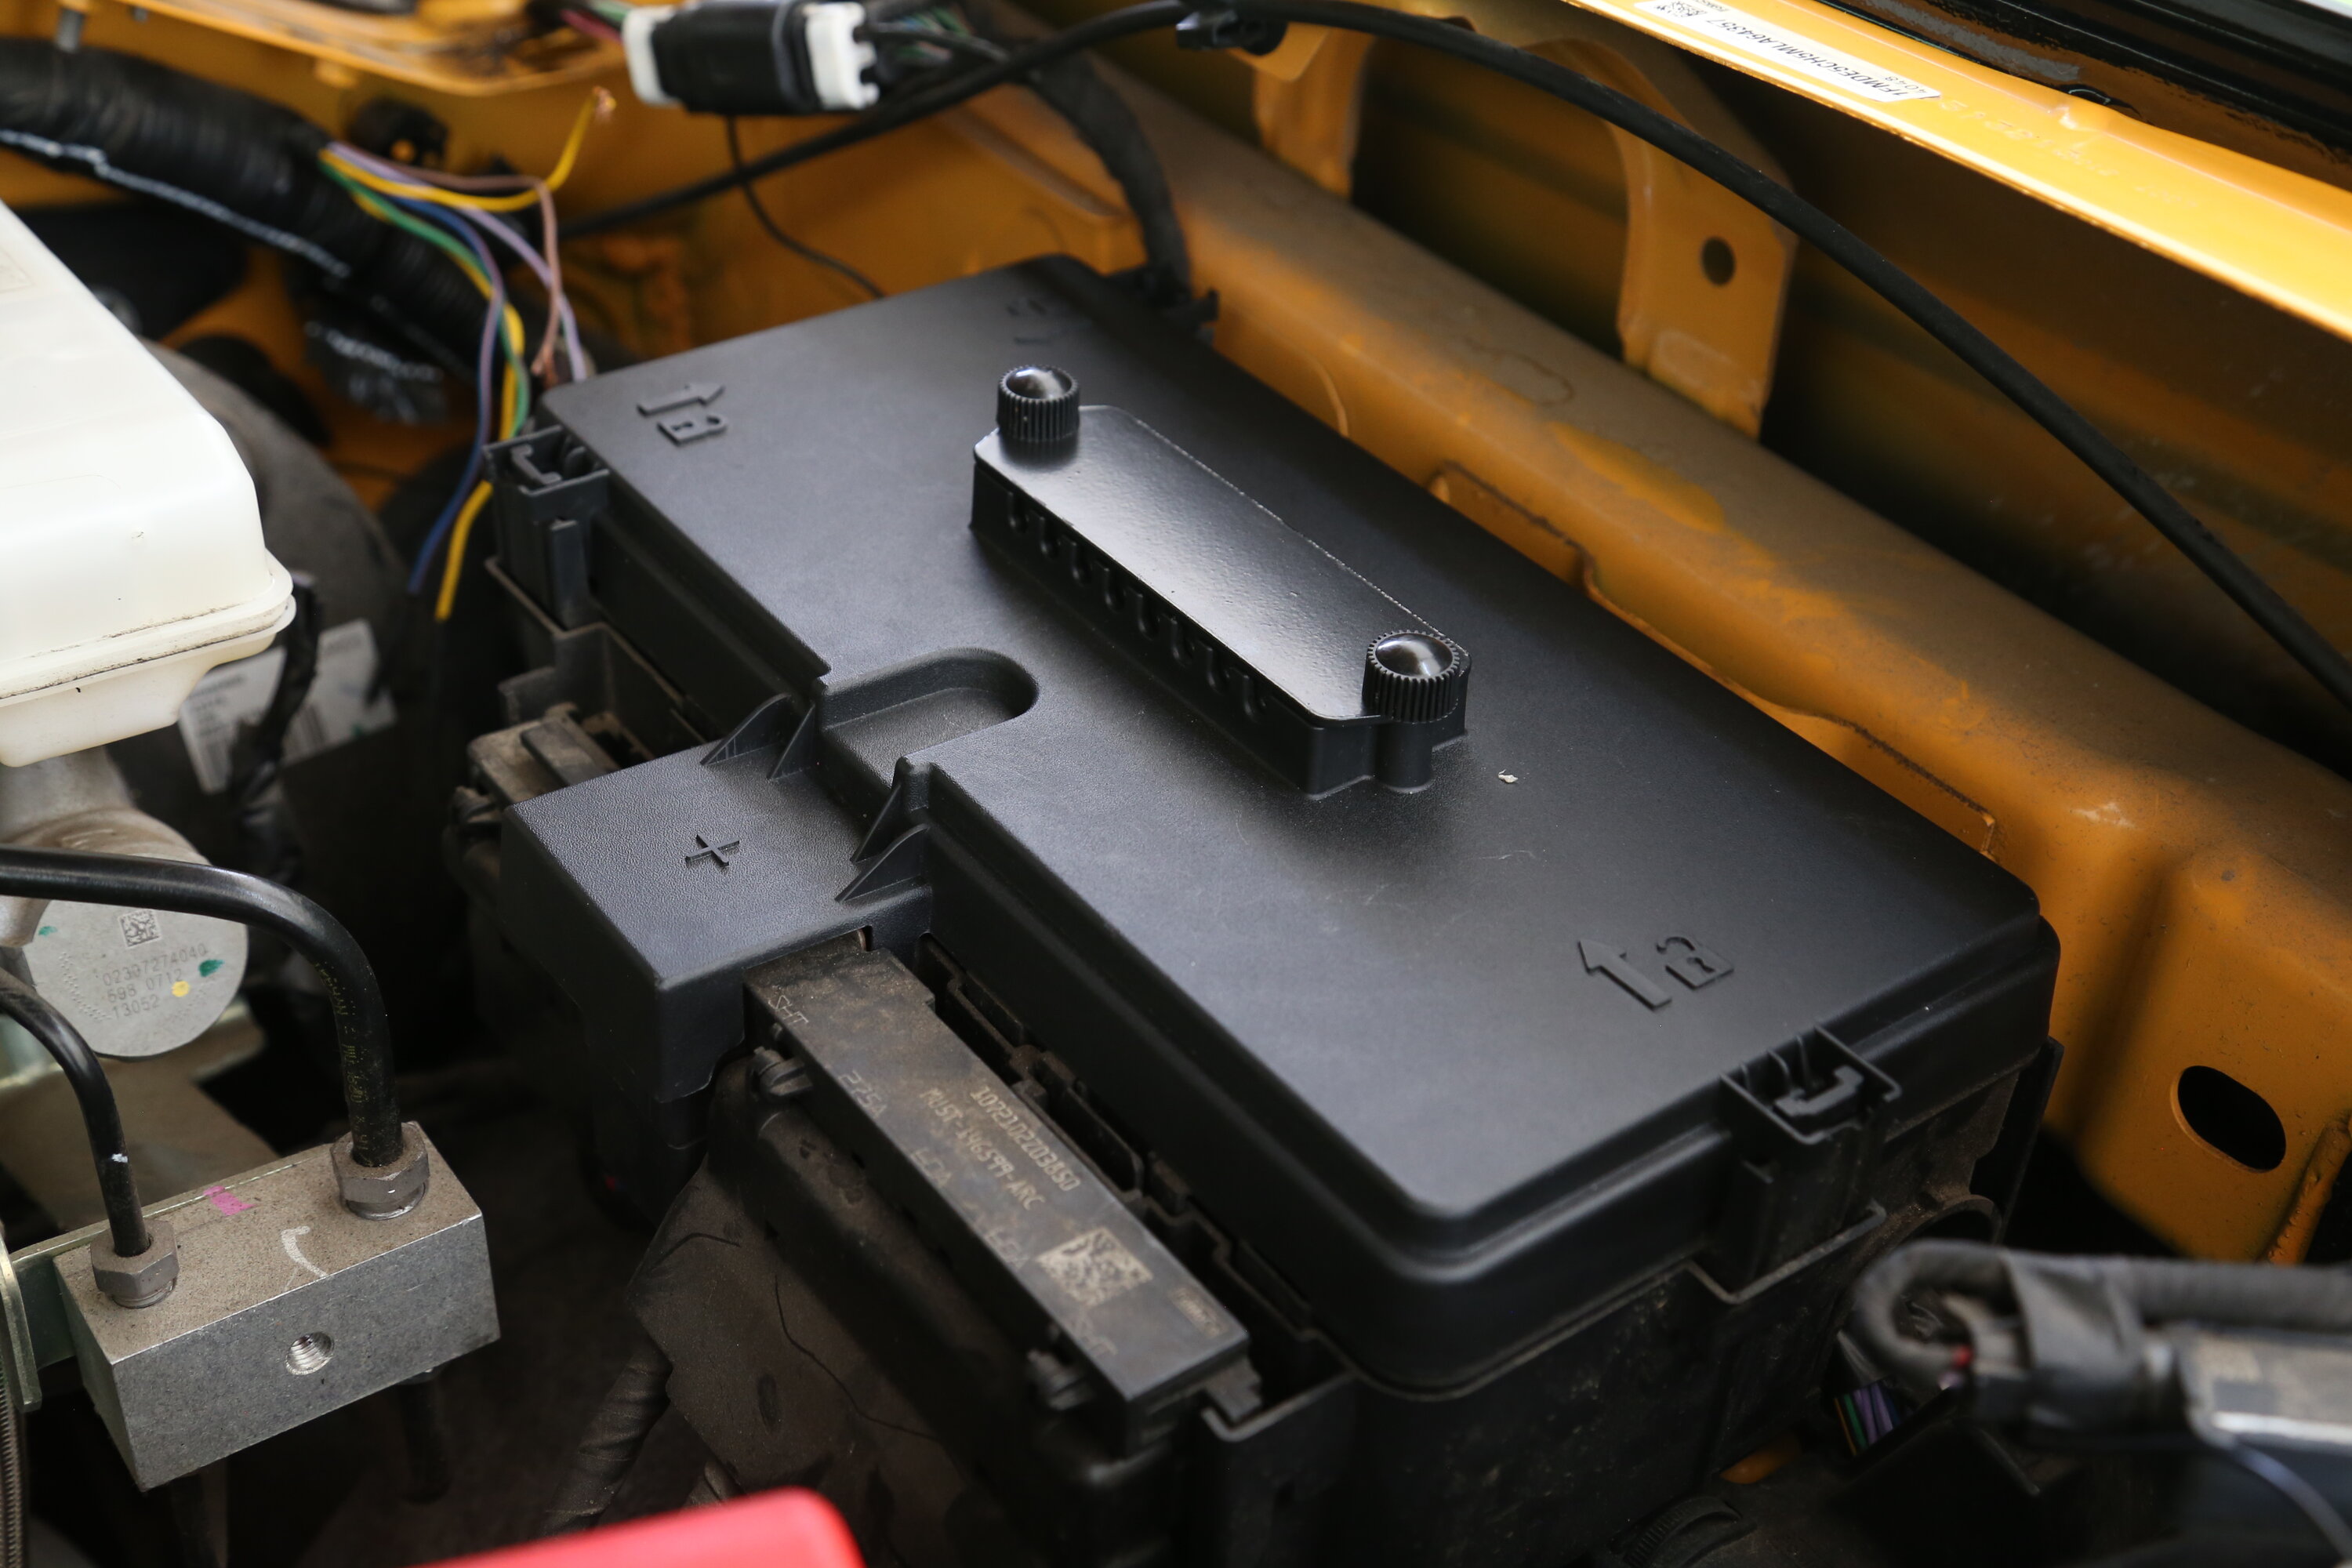 Ford Bronco Mabett Fuse Box Cover for Ford Bronco 2021 2022 2023 Available Now! IMG_4144.JPG